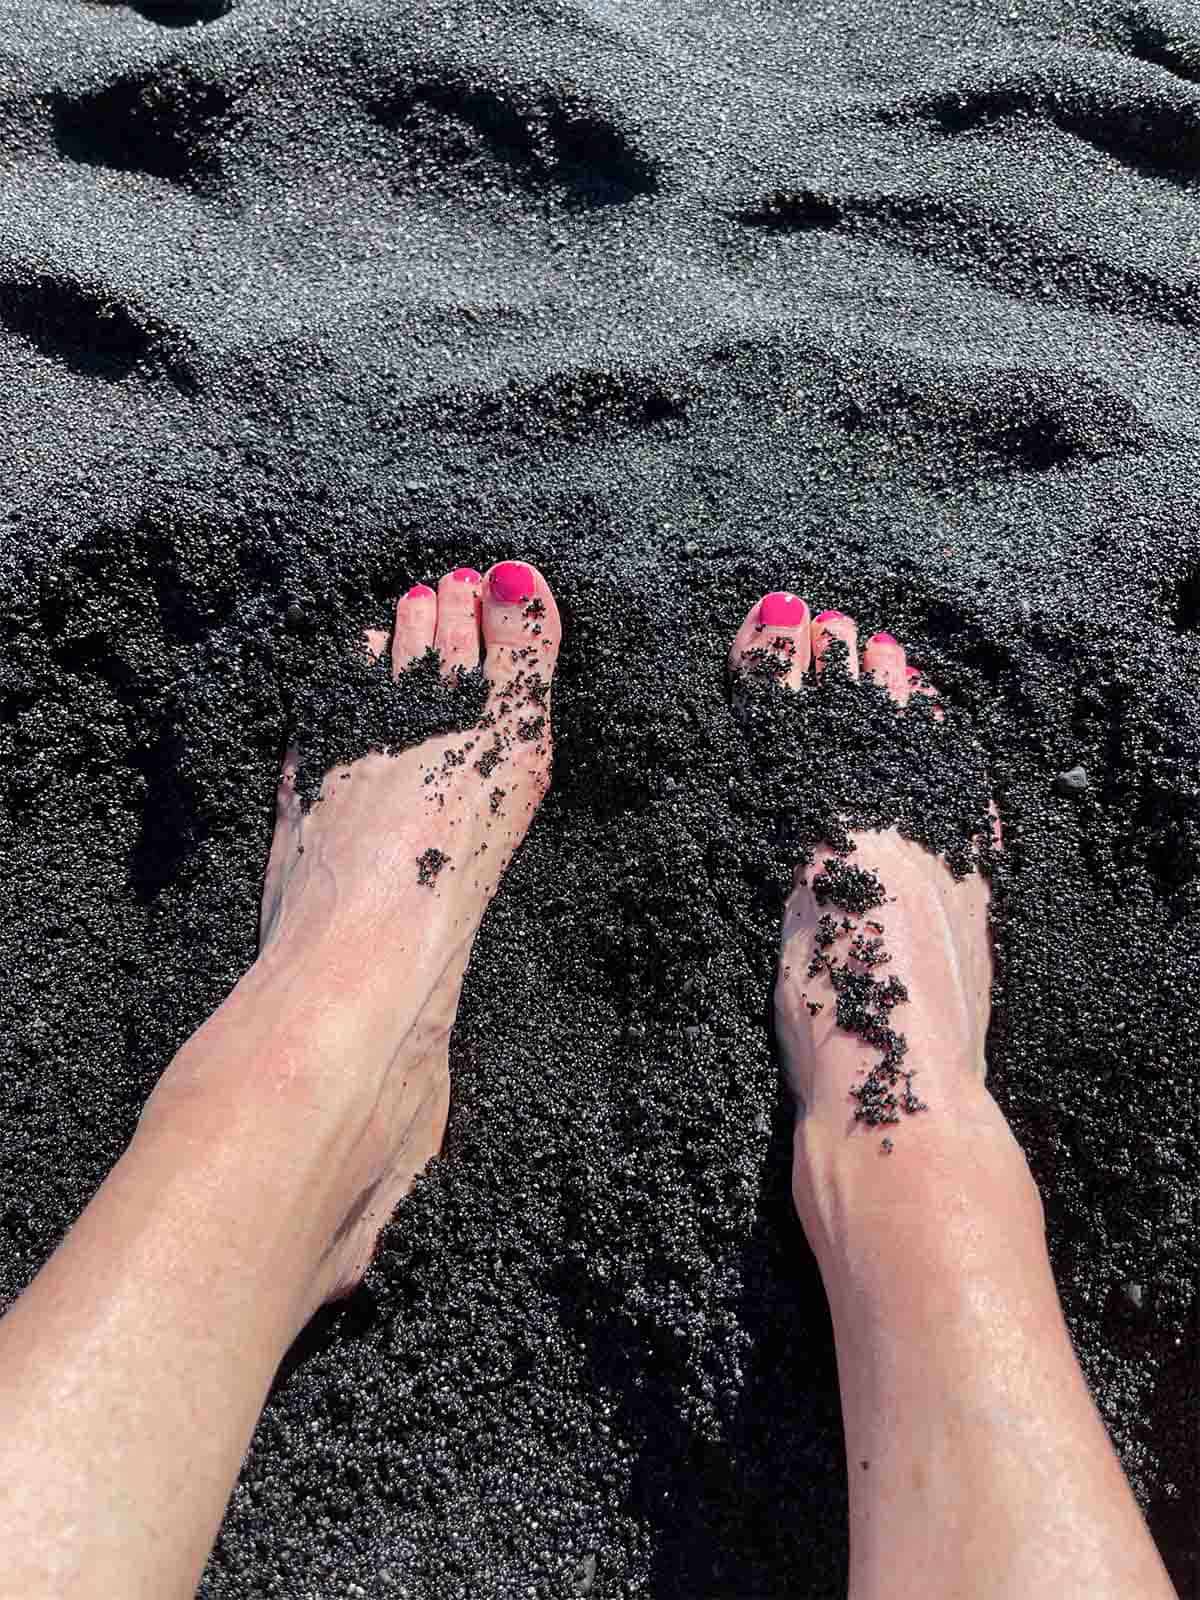 My feet in the black sand.